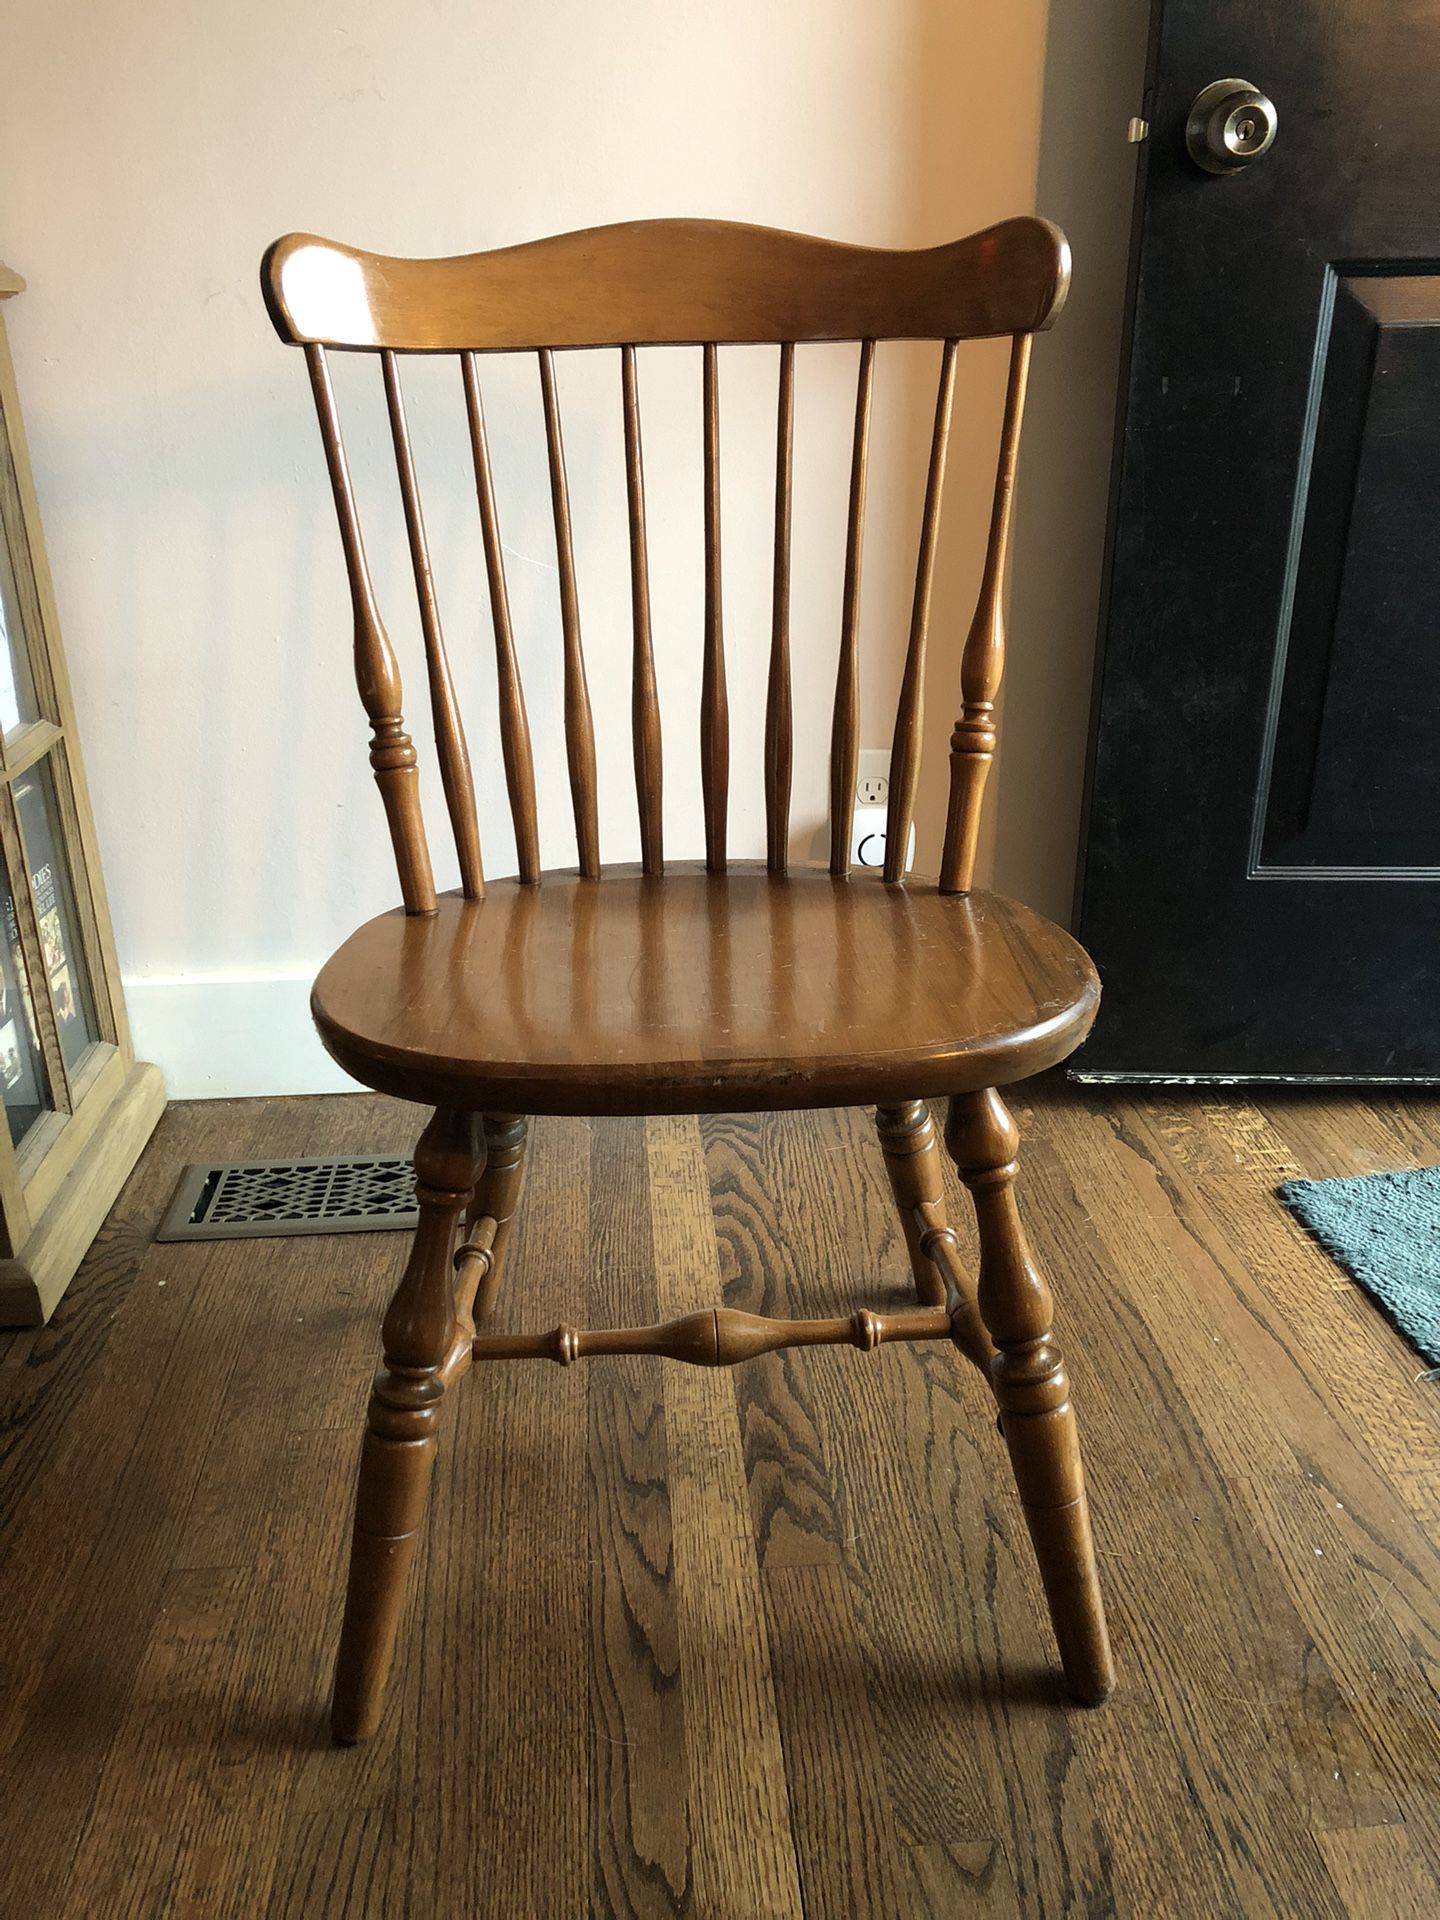 Solid Maple Wooden Chair 